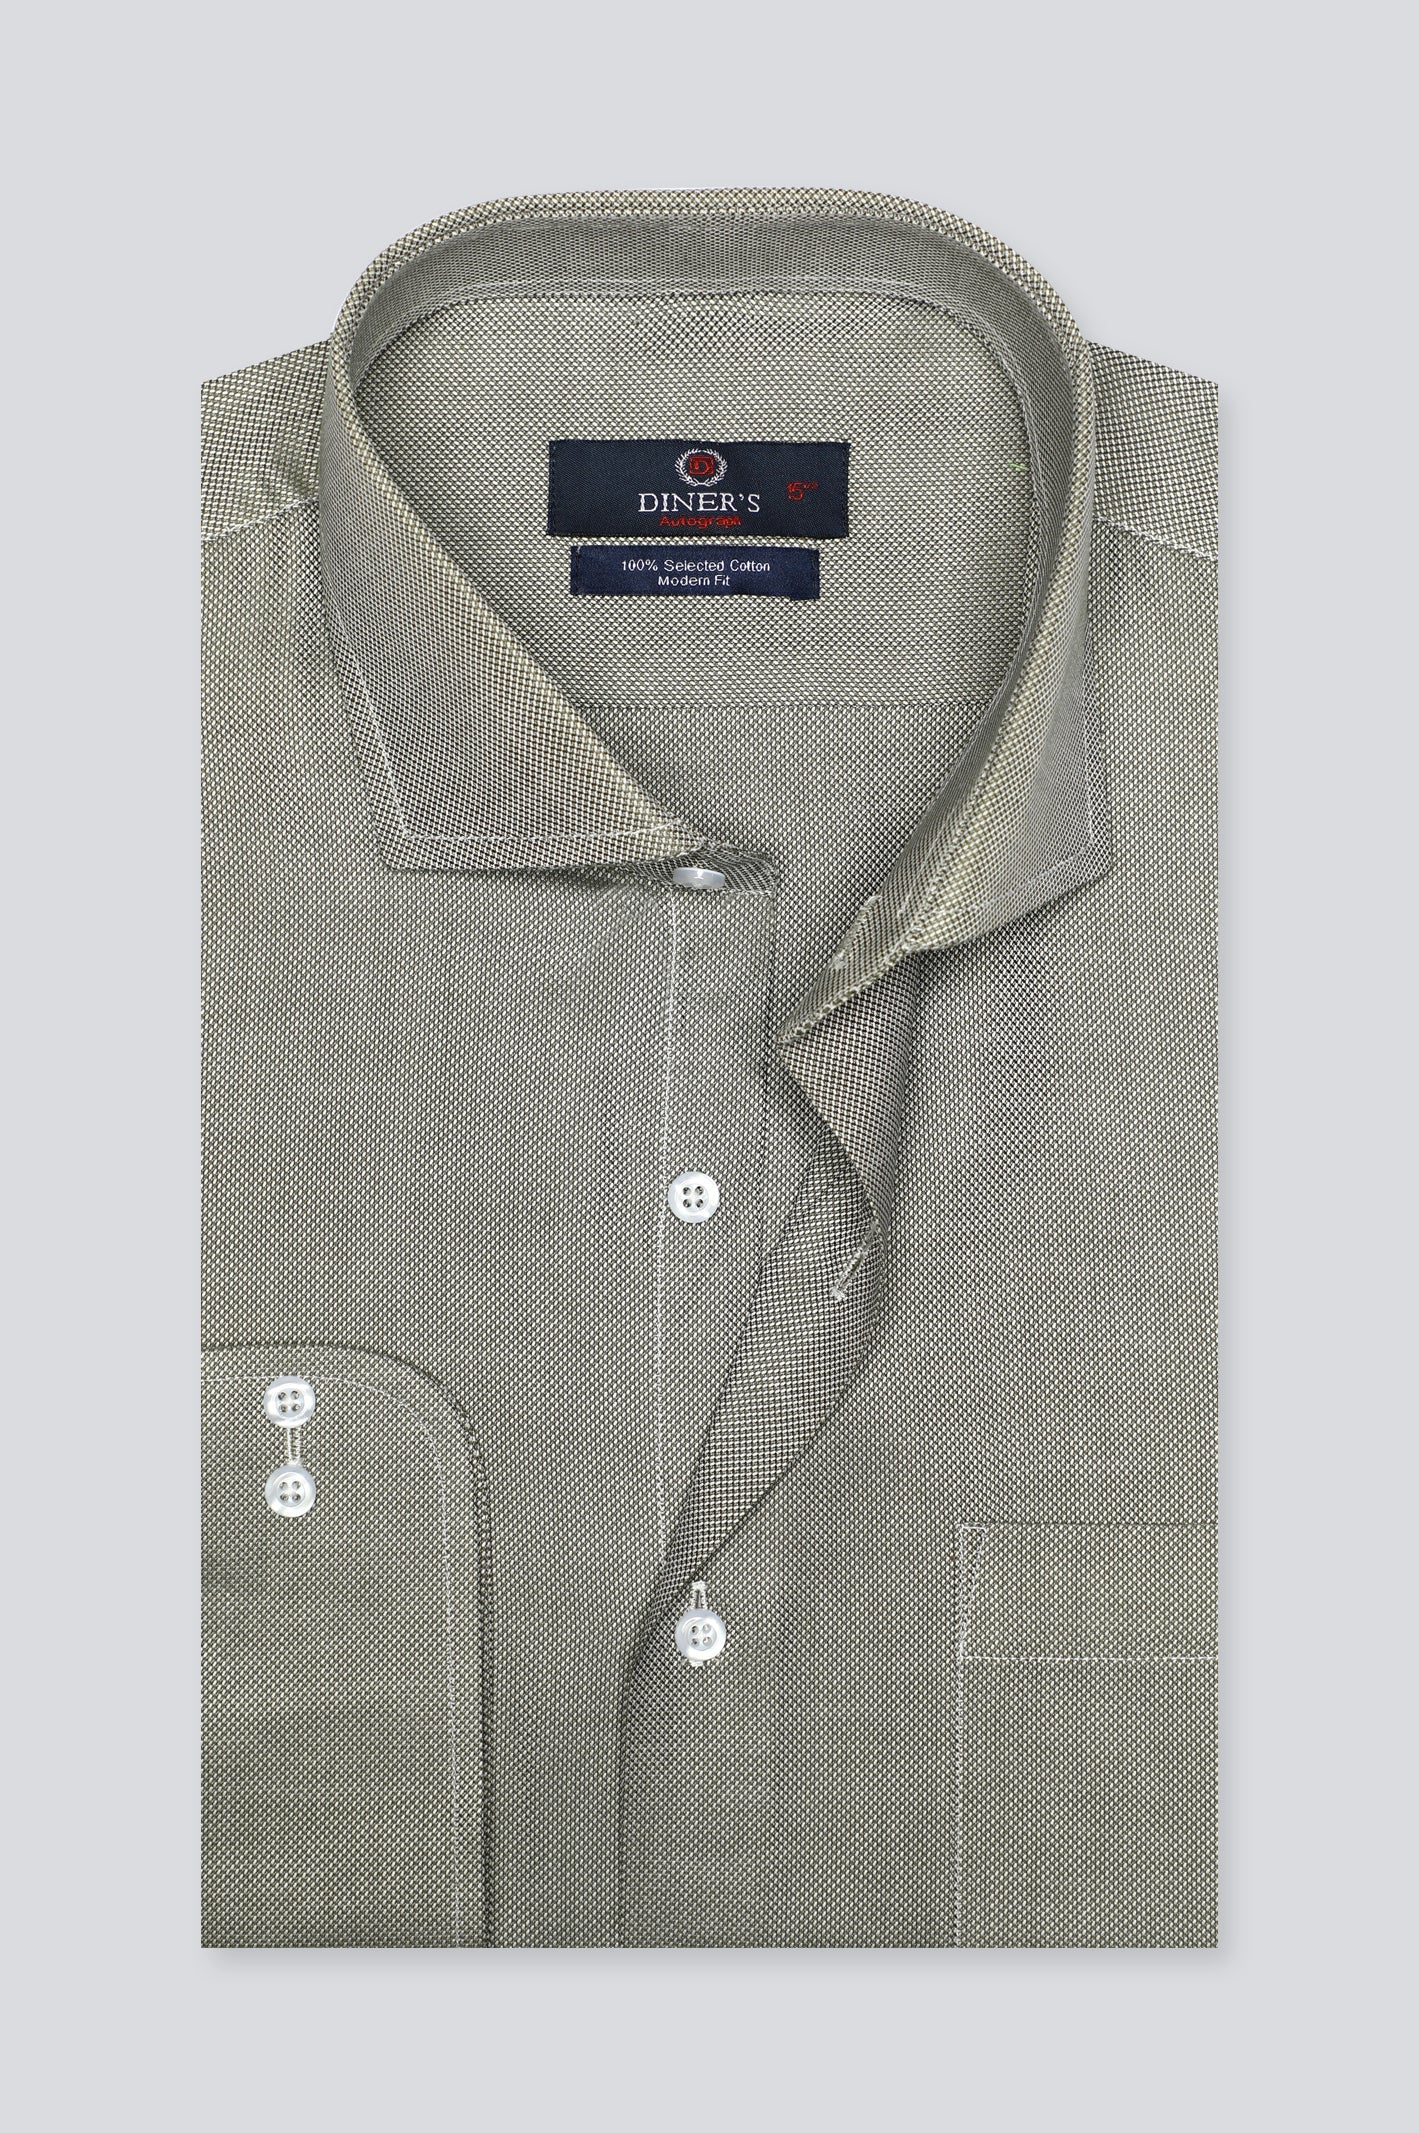 Olive Texture Formal Autograph Shirt for Men - Diners